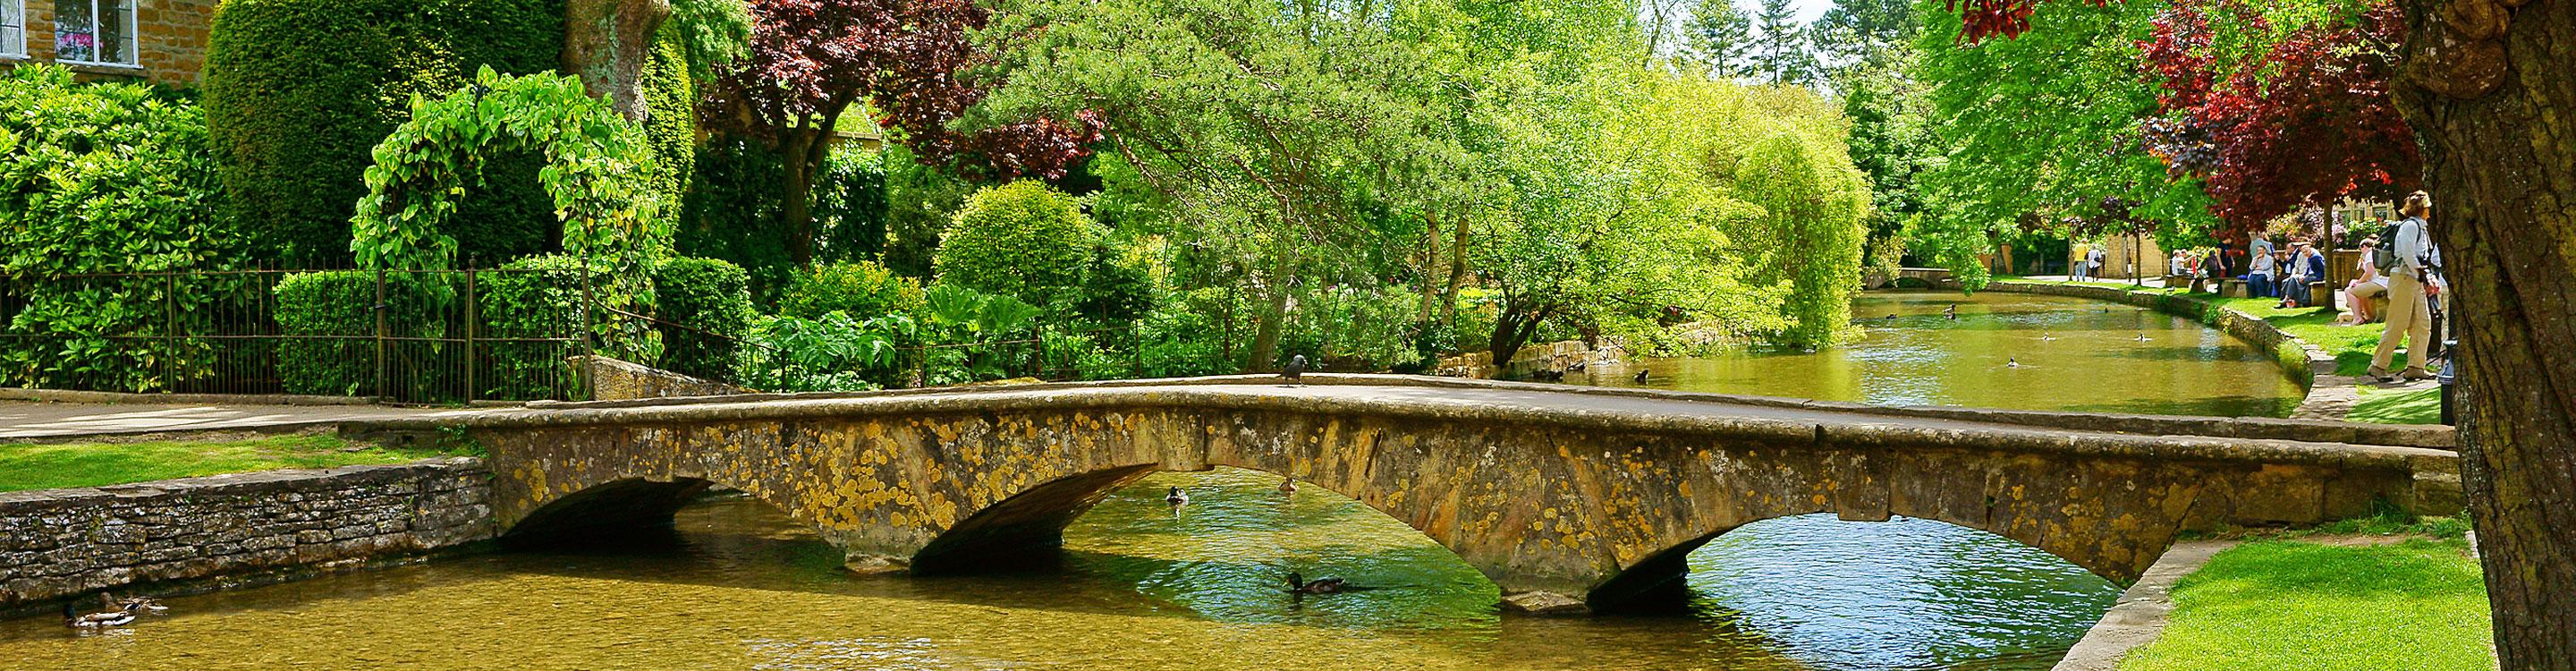 The River Windrush flowing through Bourton-on-the-Water, with a low bridge and trees overhanging the water, UK